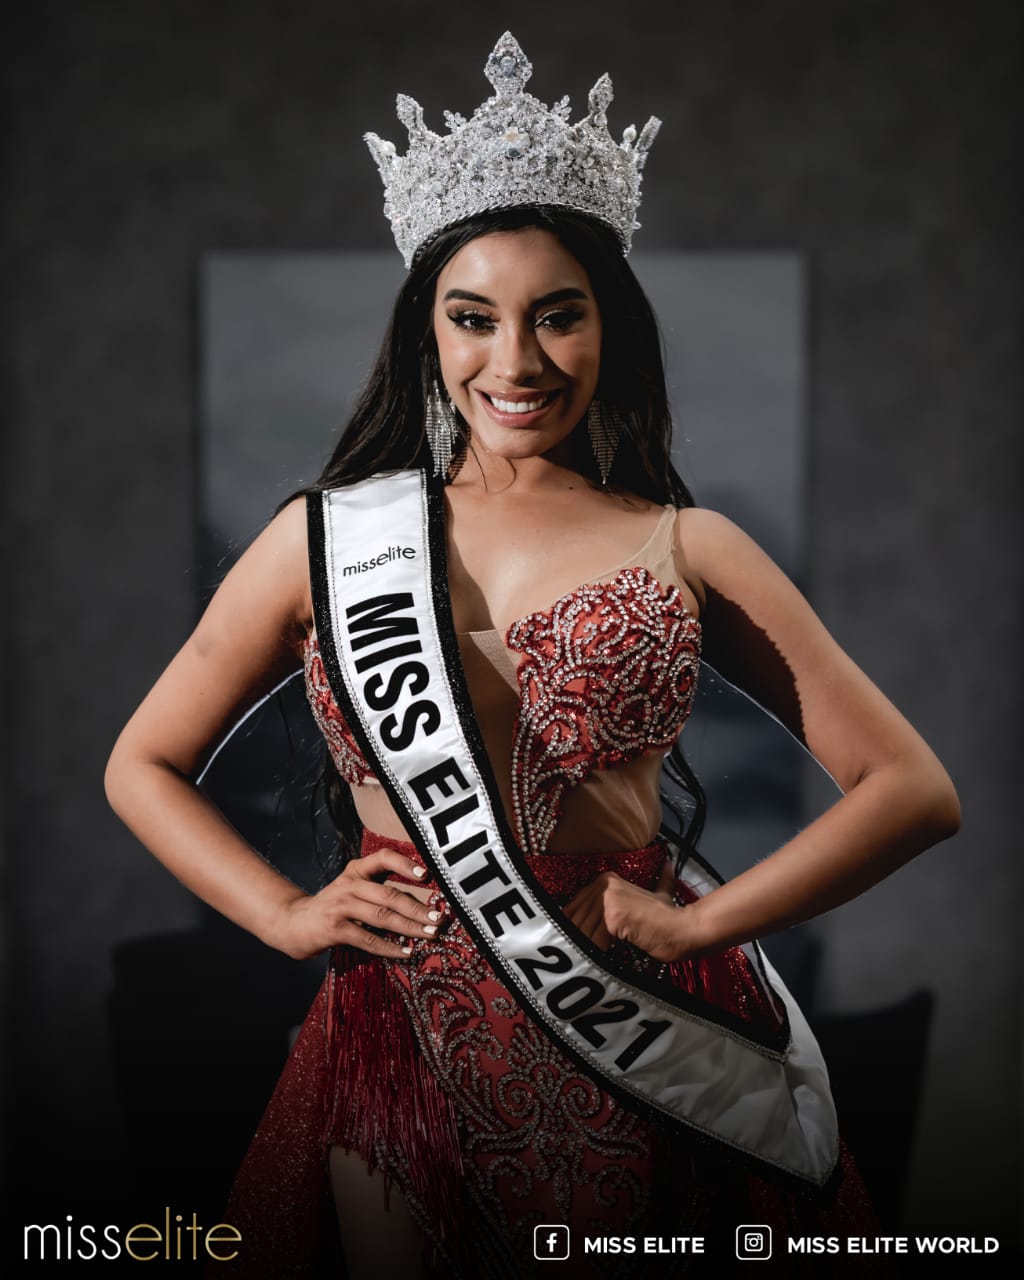 From Mexico to the world: Fernanda Pumar is Miss Elite 2021